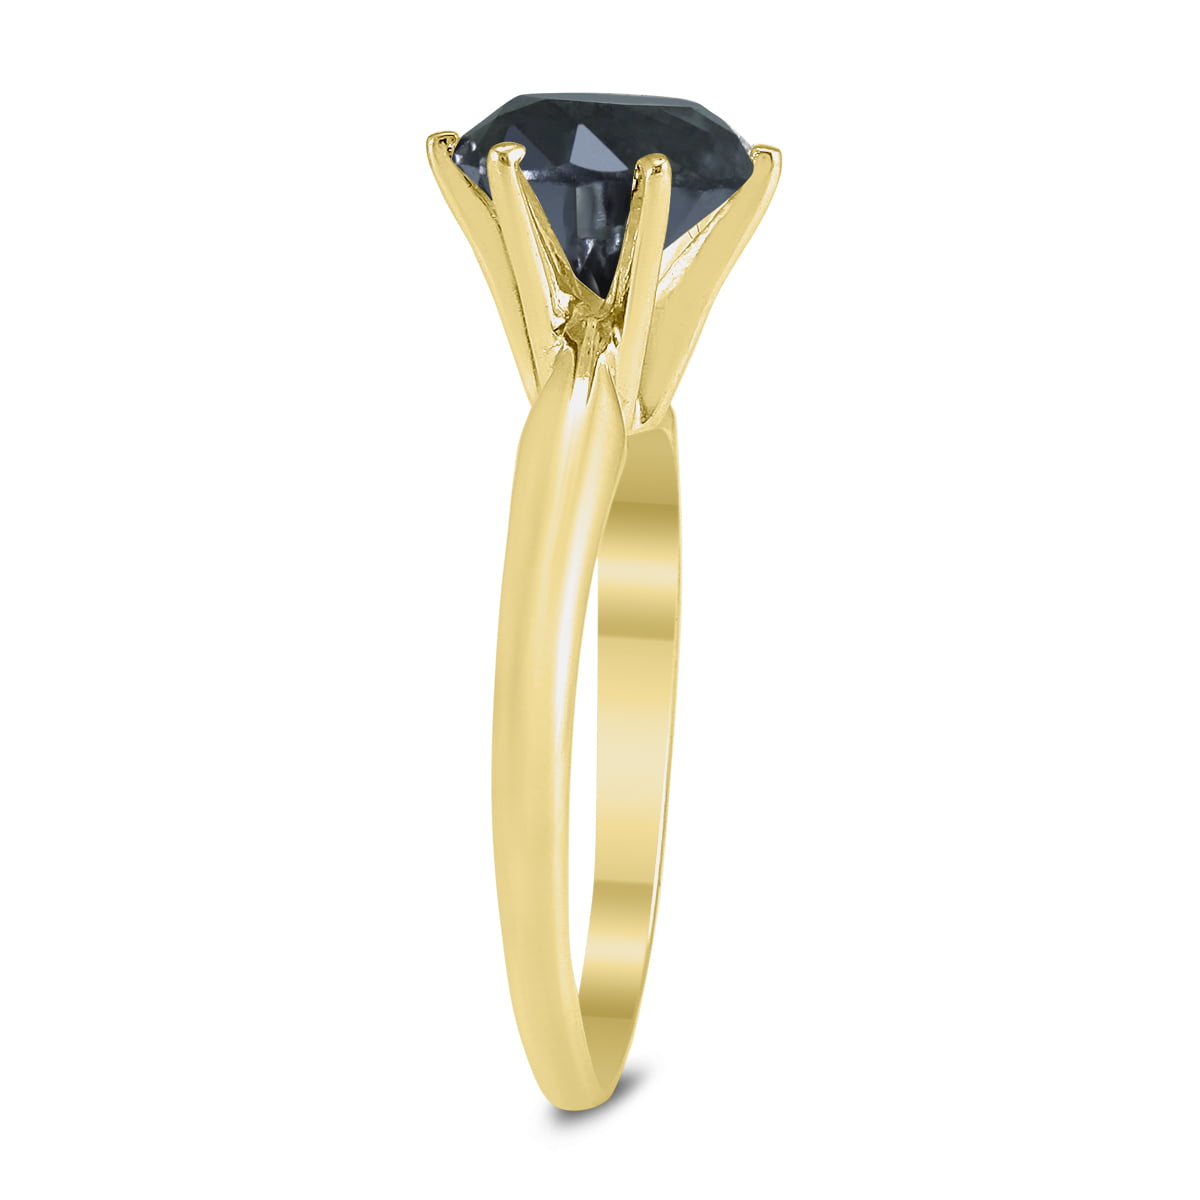 1 1/2 Carat Round Black Diamond Solitaire Ring in 14K Yellow Gold